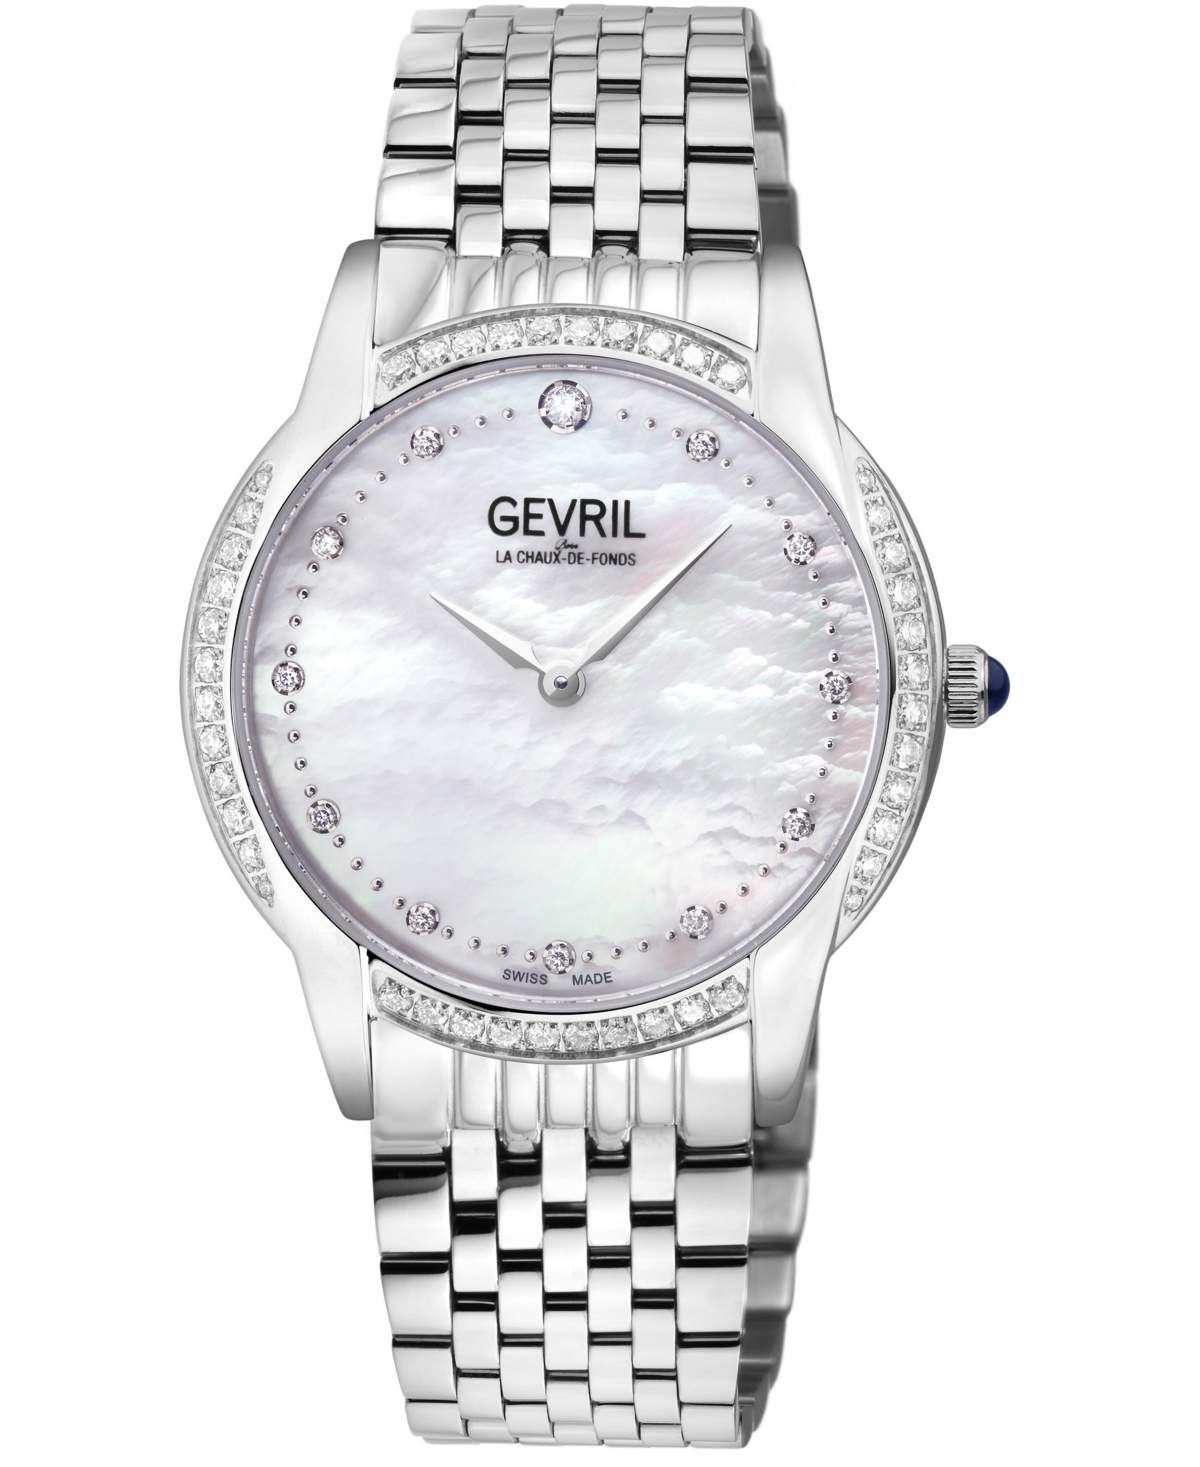 GEVRIL WOMEN'S AIROLO SILVER-TONE STAINLESS STEEL WATCH 36MM